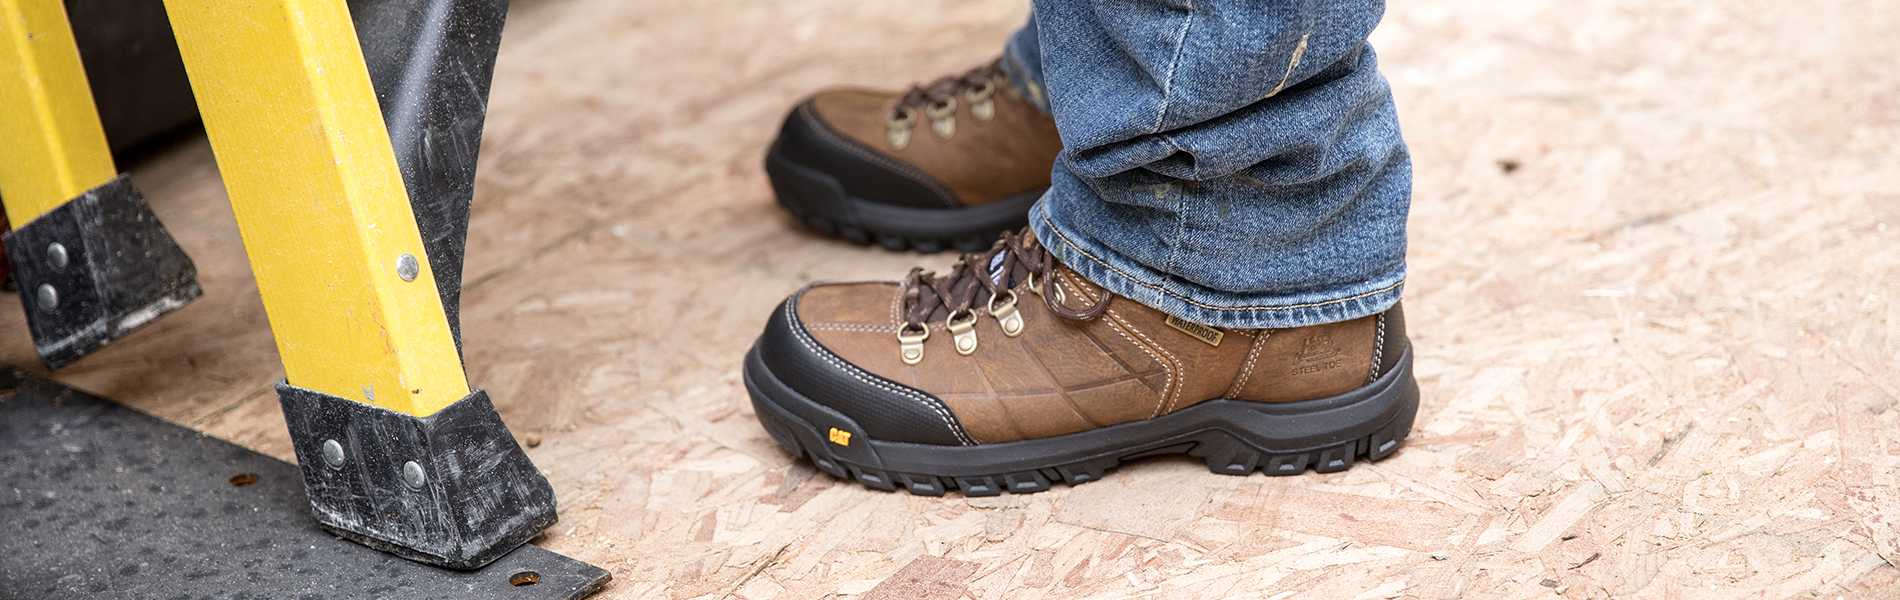 where to buy steel toe boots